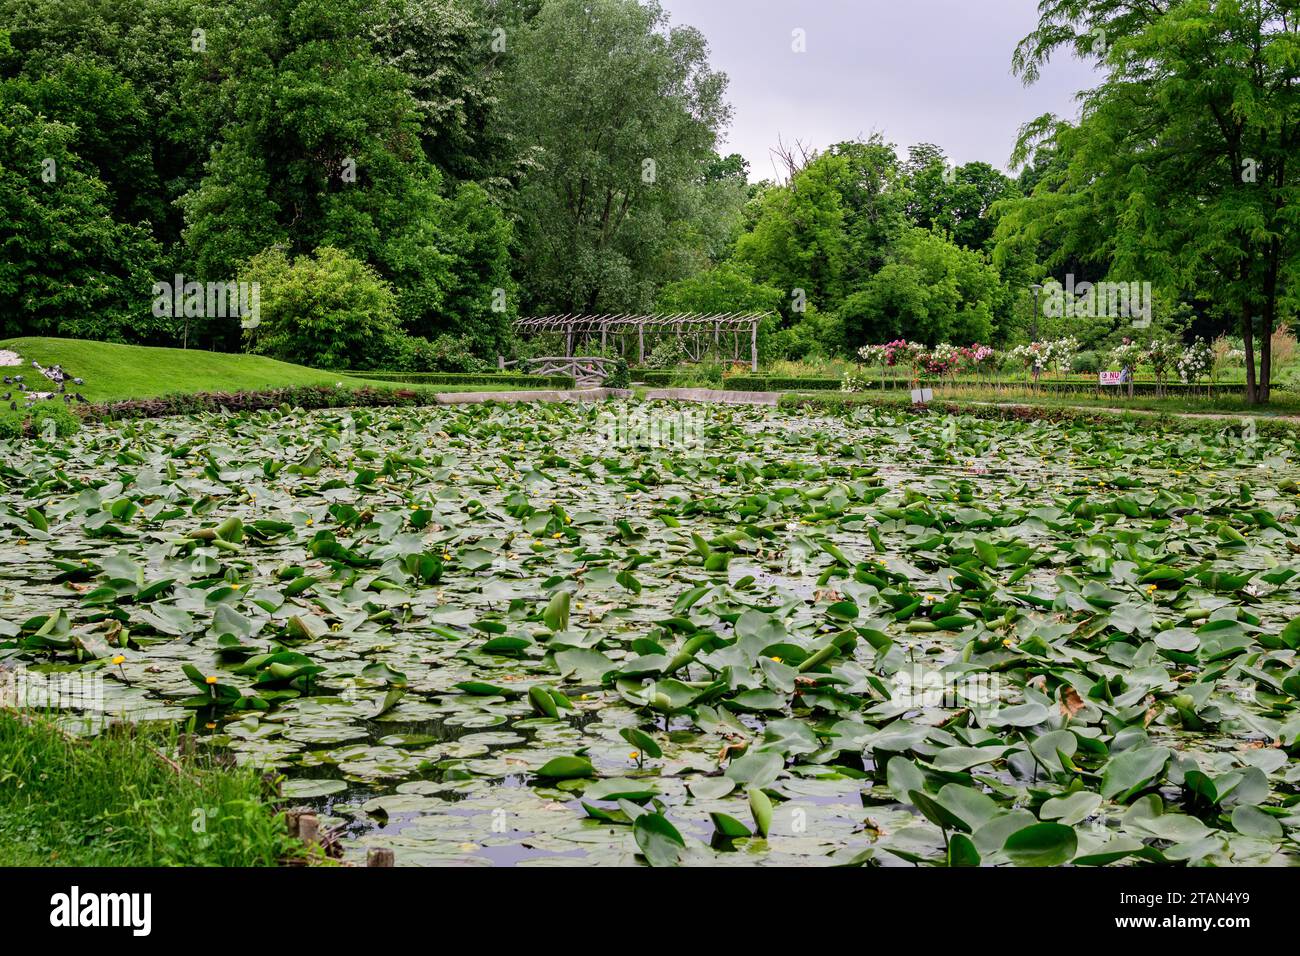 Vivid landscape in Alexandru Buia Botanical Garden from Craiova in Dolj county, Romania, with lake, waterlillies and large green tres in a beautiful s Stock Photo